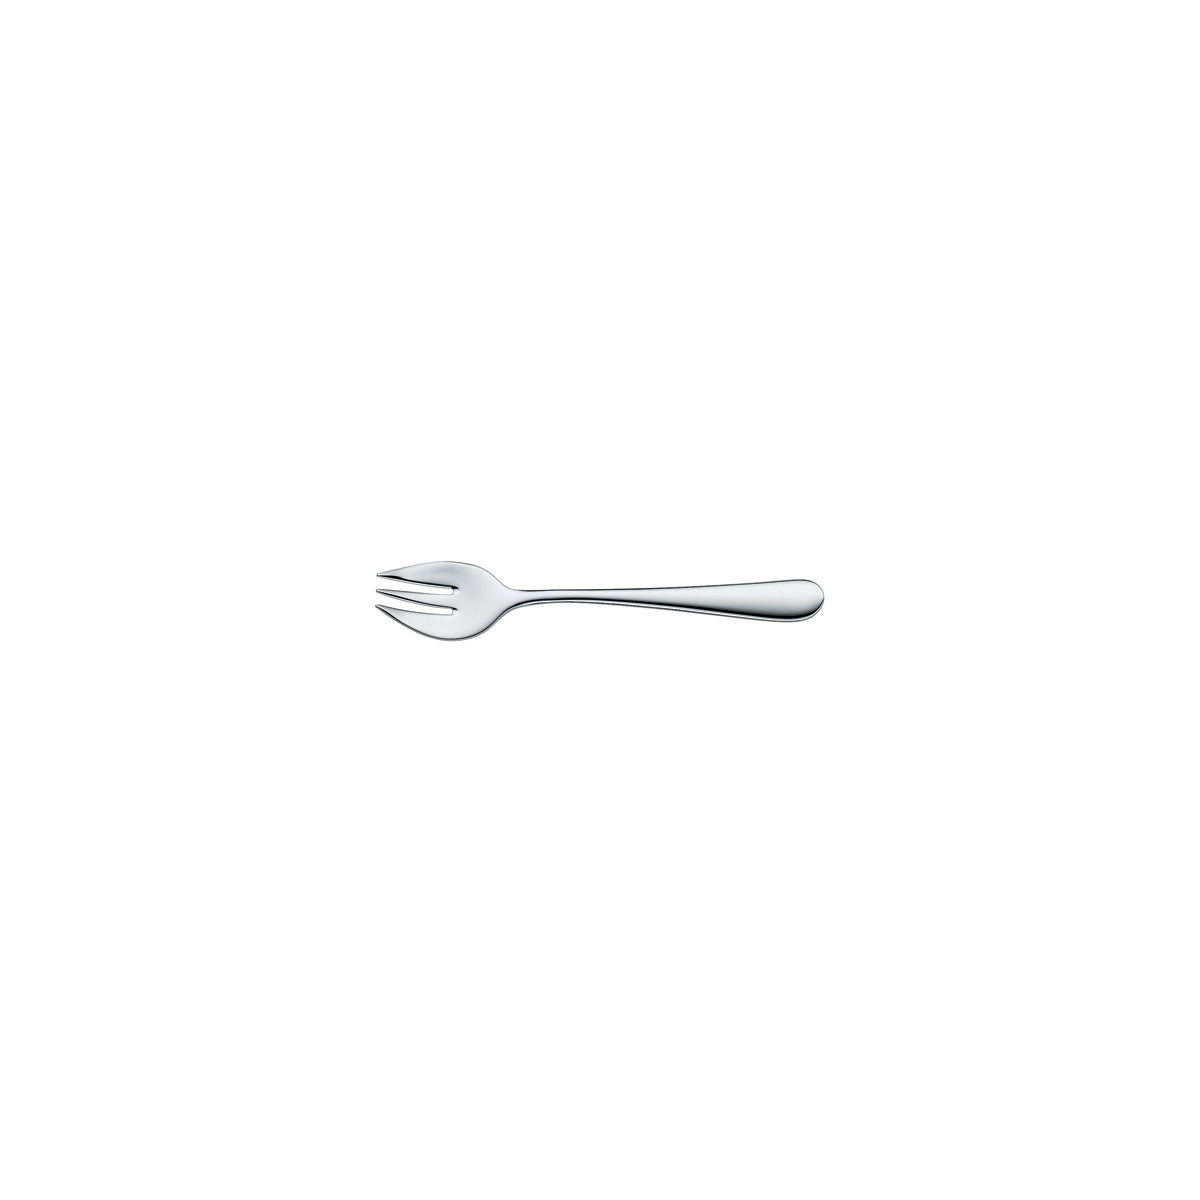 12.1940.6040 WMF Signum Oyster Fork Stainless Steel Tomkin Australia Hospitality Supplies